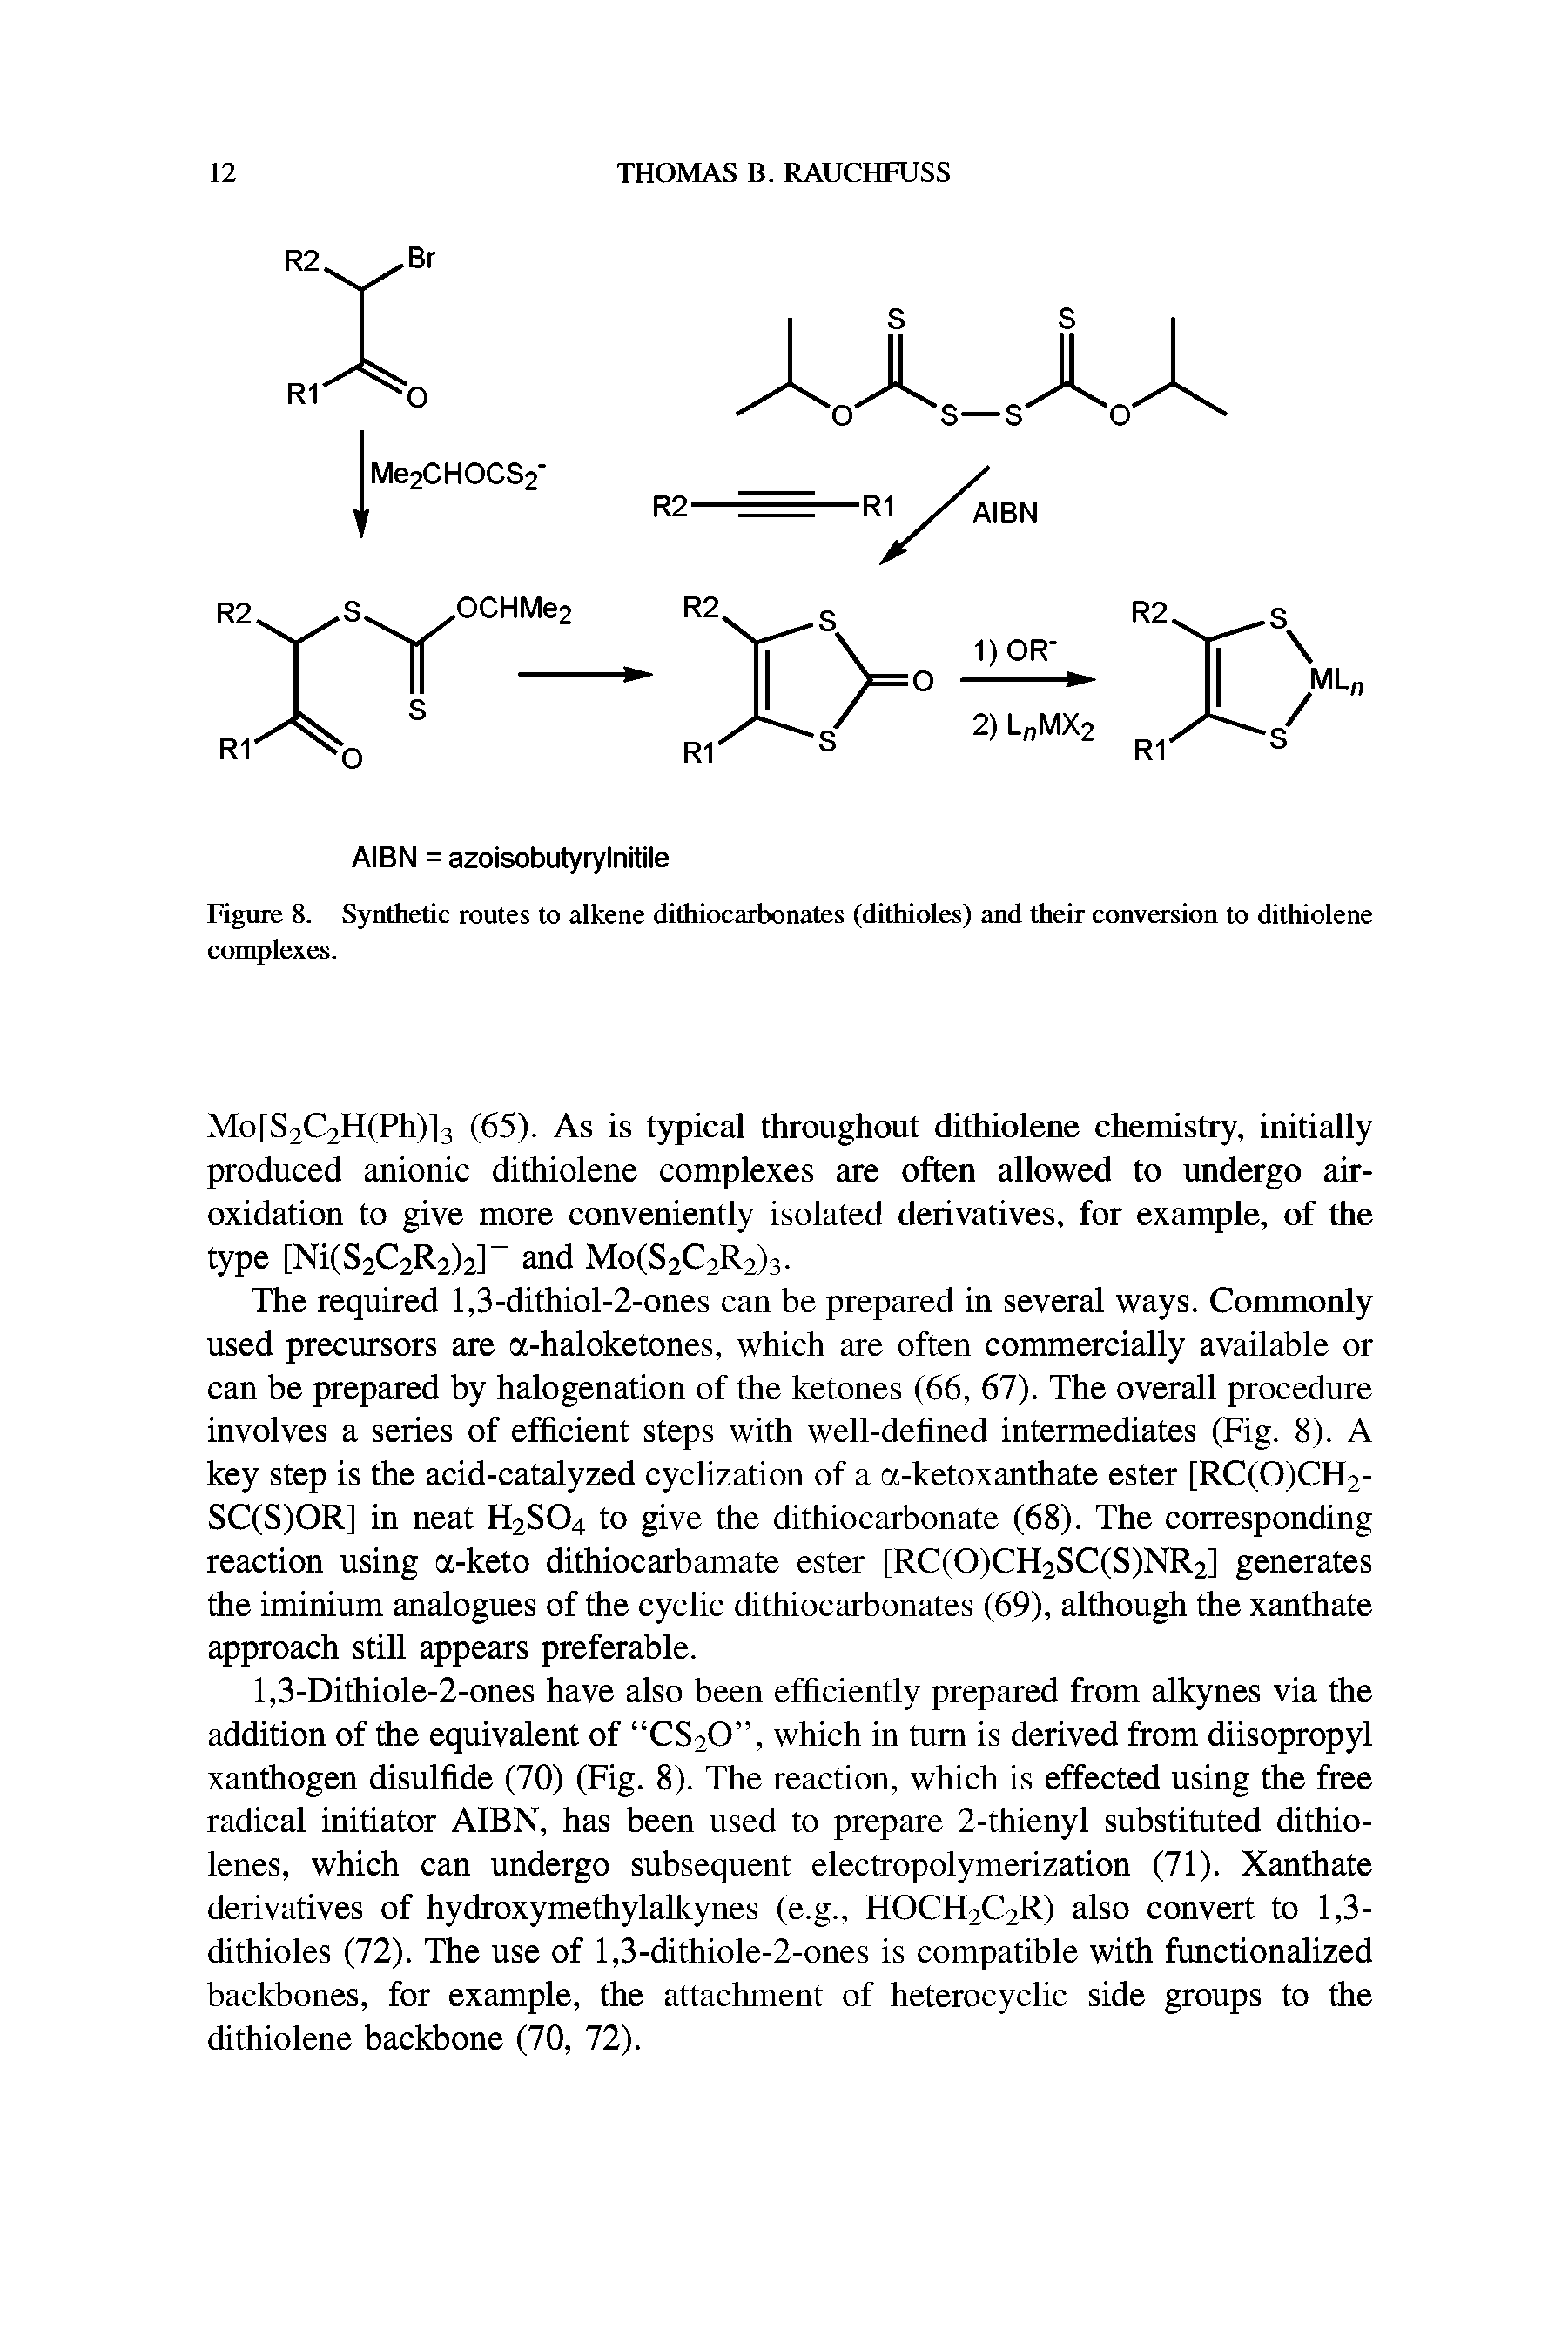 Figure 8. Synthetic routes to alkene dithiocarbonates (dithioles) and their conversion to dithiolene complexes.